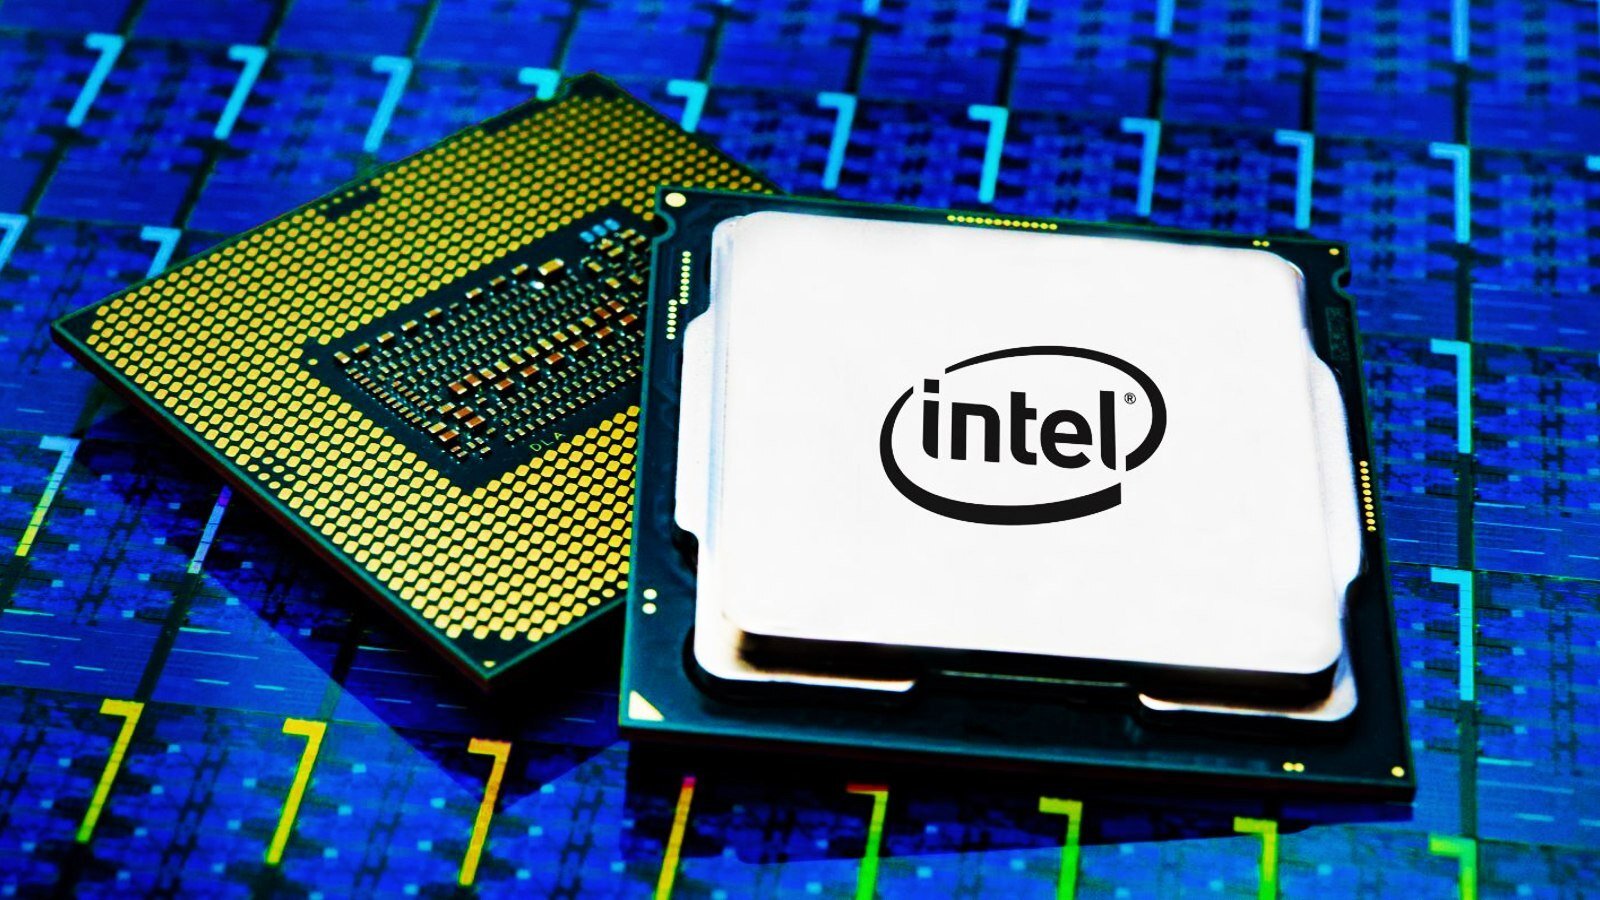 New Downfall attacks steal encryption keys and sensitive data from Intel CPUs